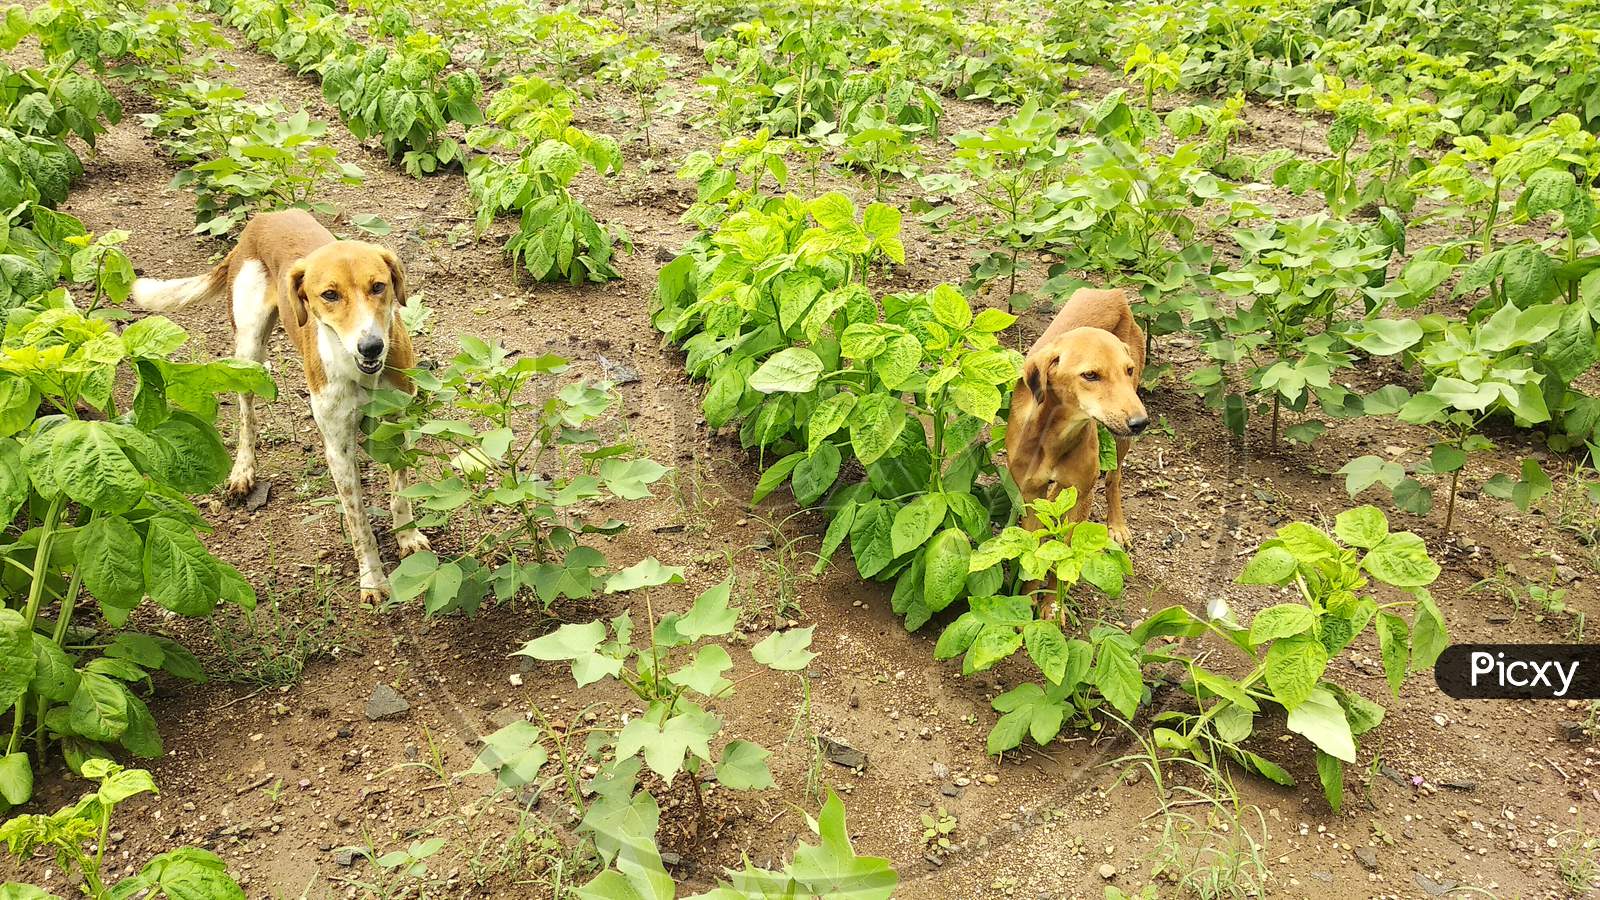 Cotton is planted in the field during the monsoon season and the dog protects it. Fri, 7 Aug 2020 india.